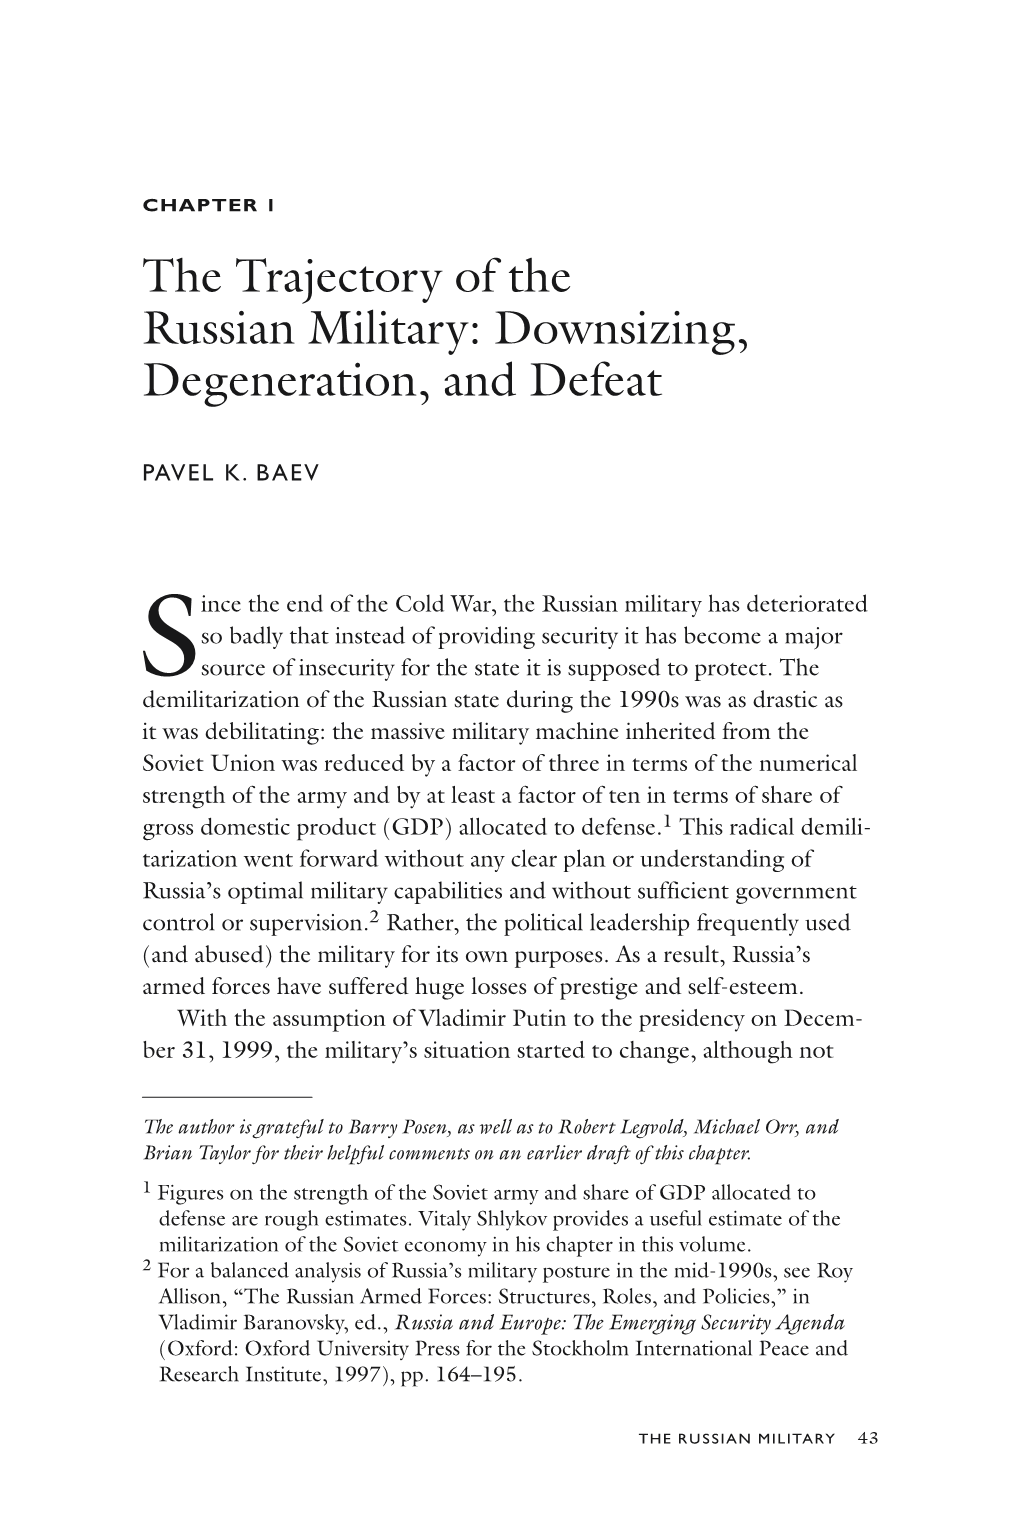 The Trajectory of the Russian Military: Downsizing, Degeneration, and Defeat